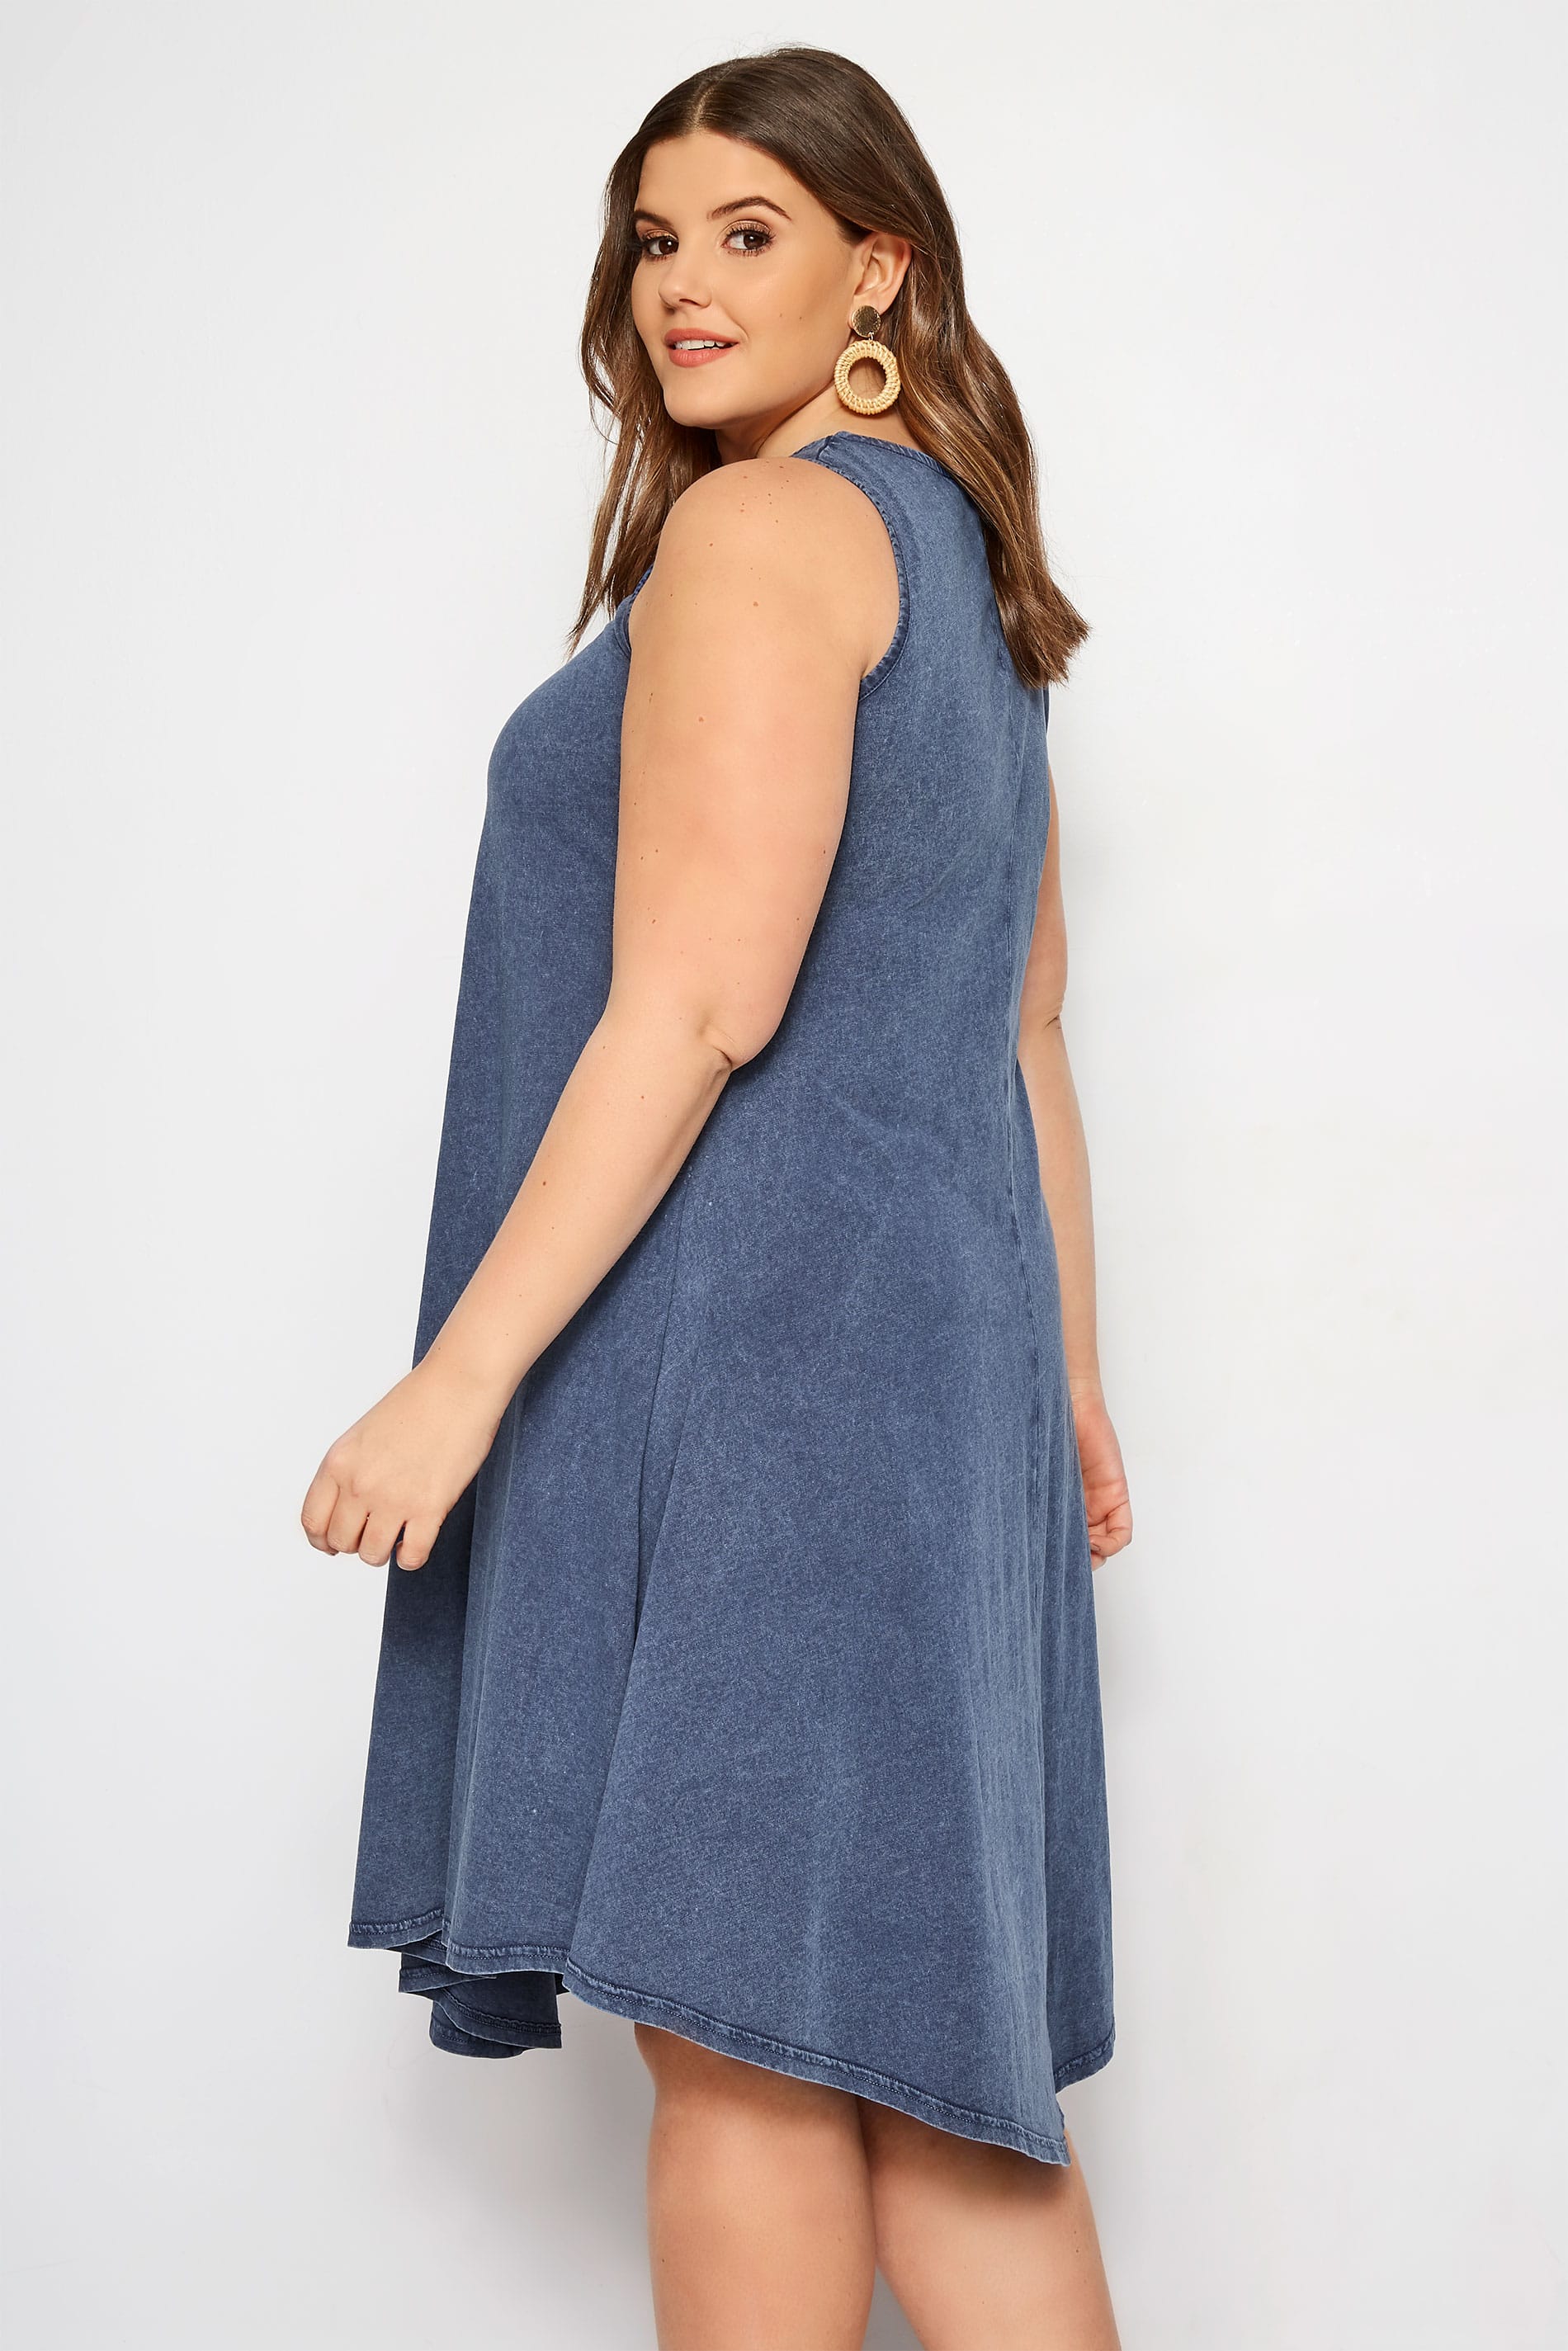 Plus Size Blue Chambray Swing Dress | Sizes 16 to 36 | Yours Clothing